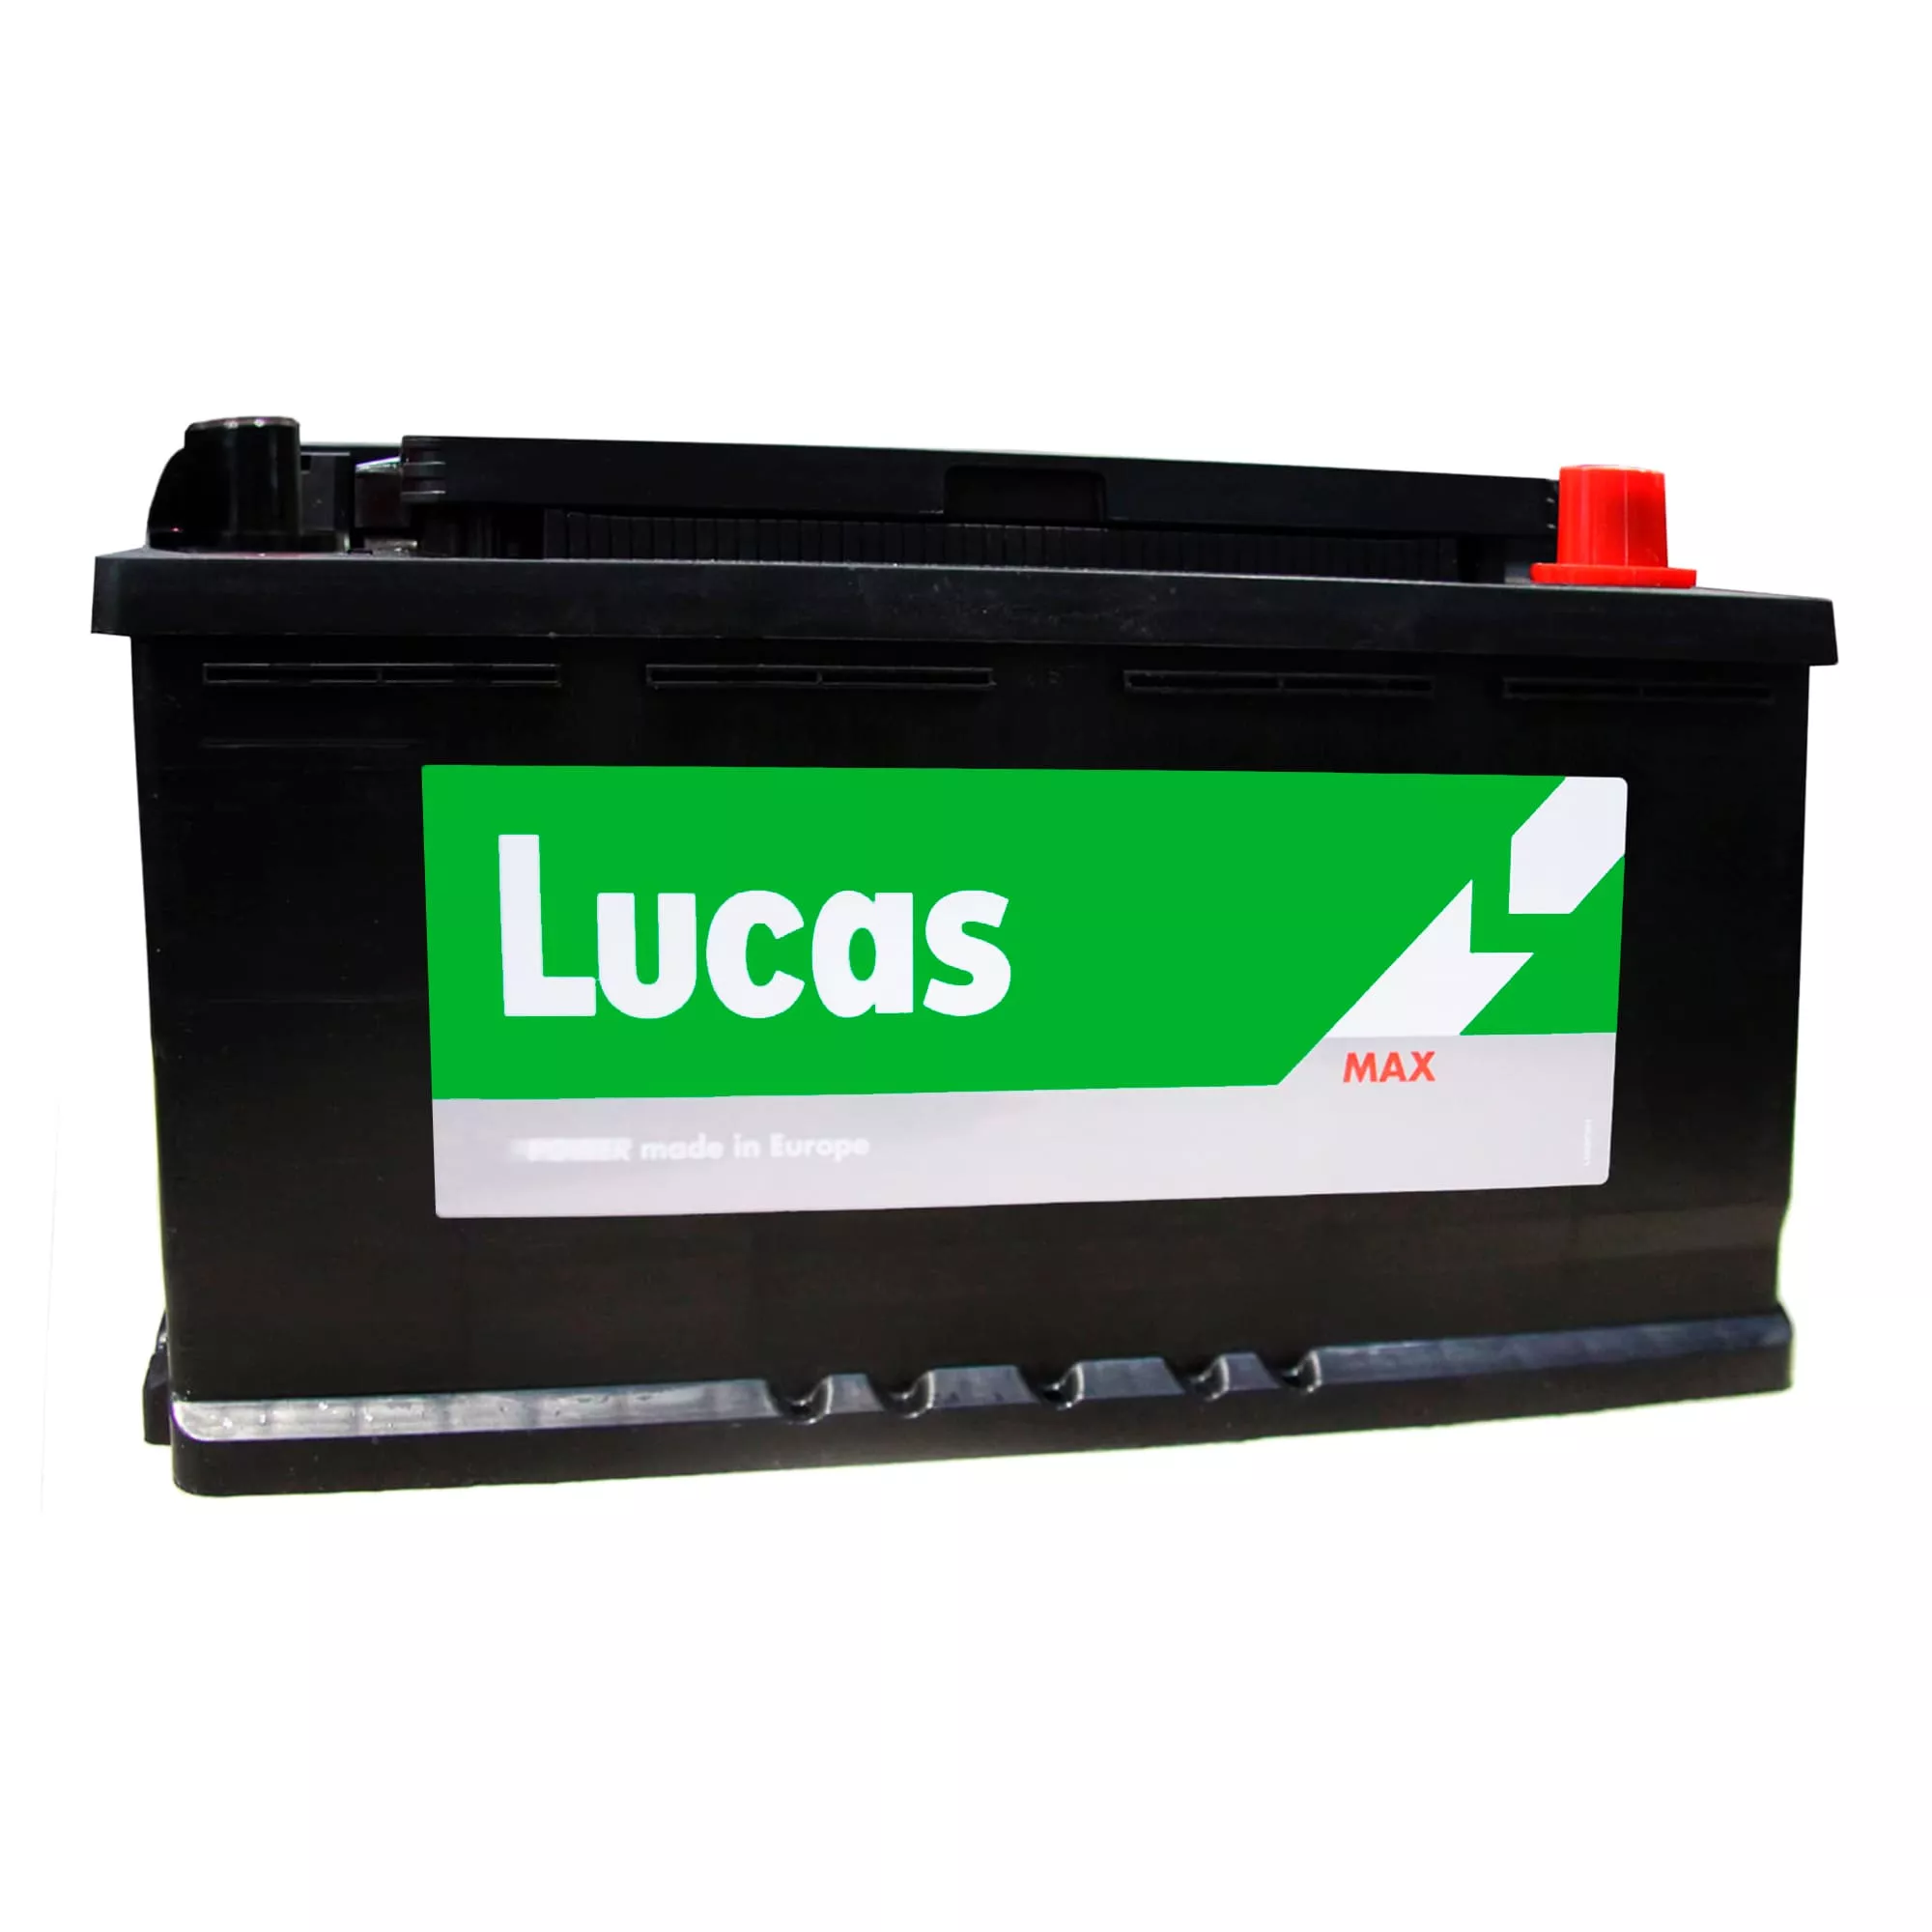 Акумулятор Lucas (Batteries manufactured by Exide in Spain) 6CT-95 АзЕ (LBM011A)